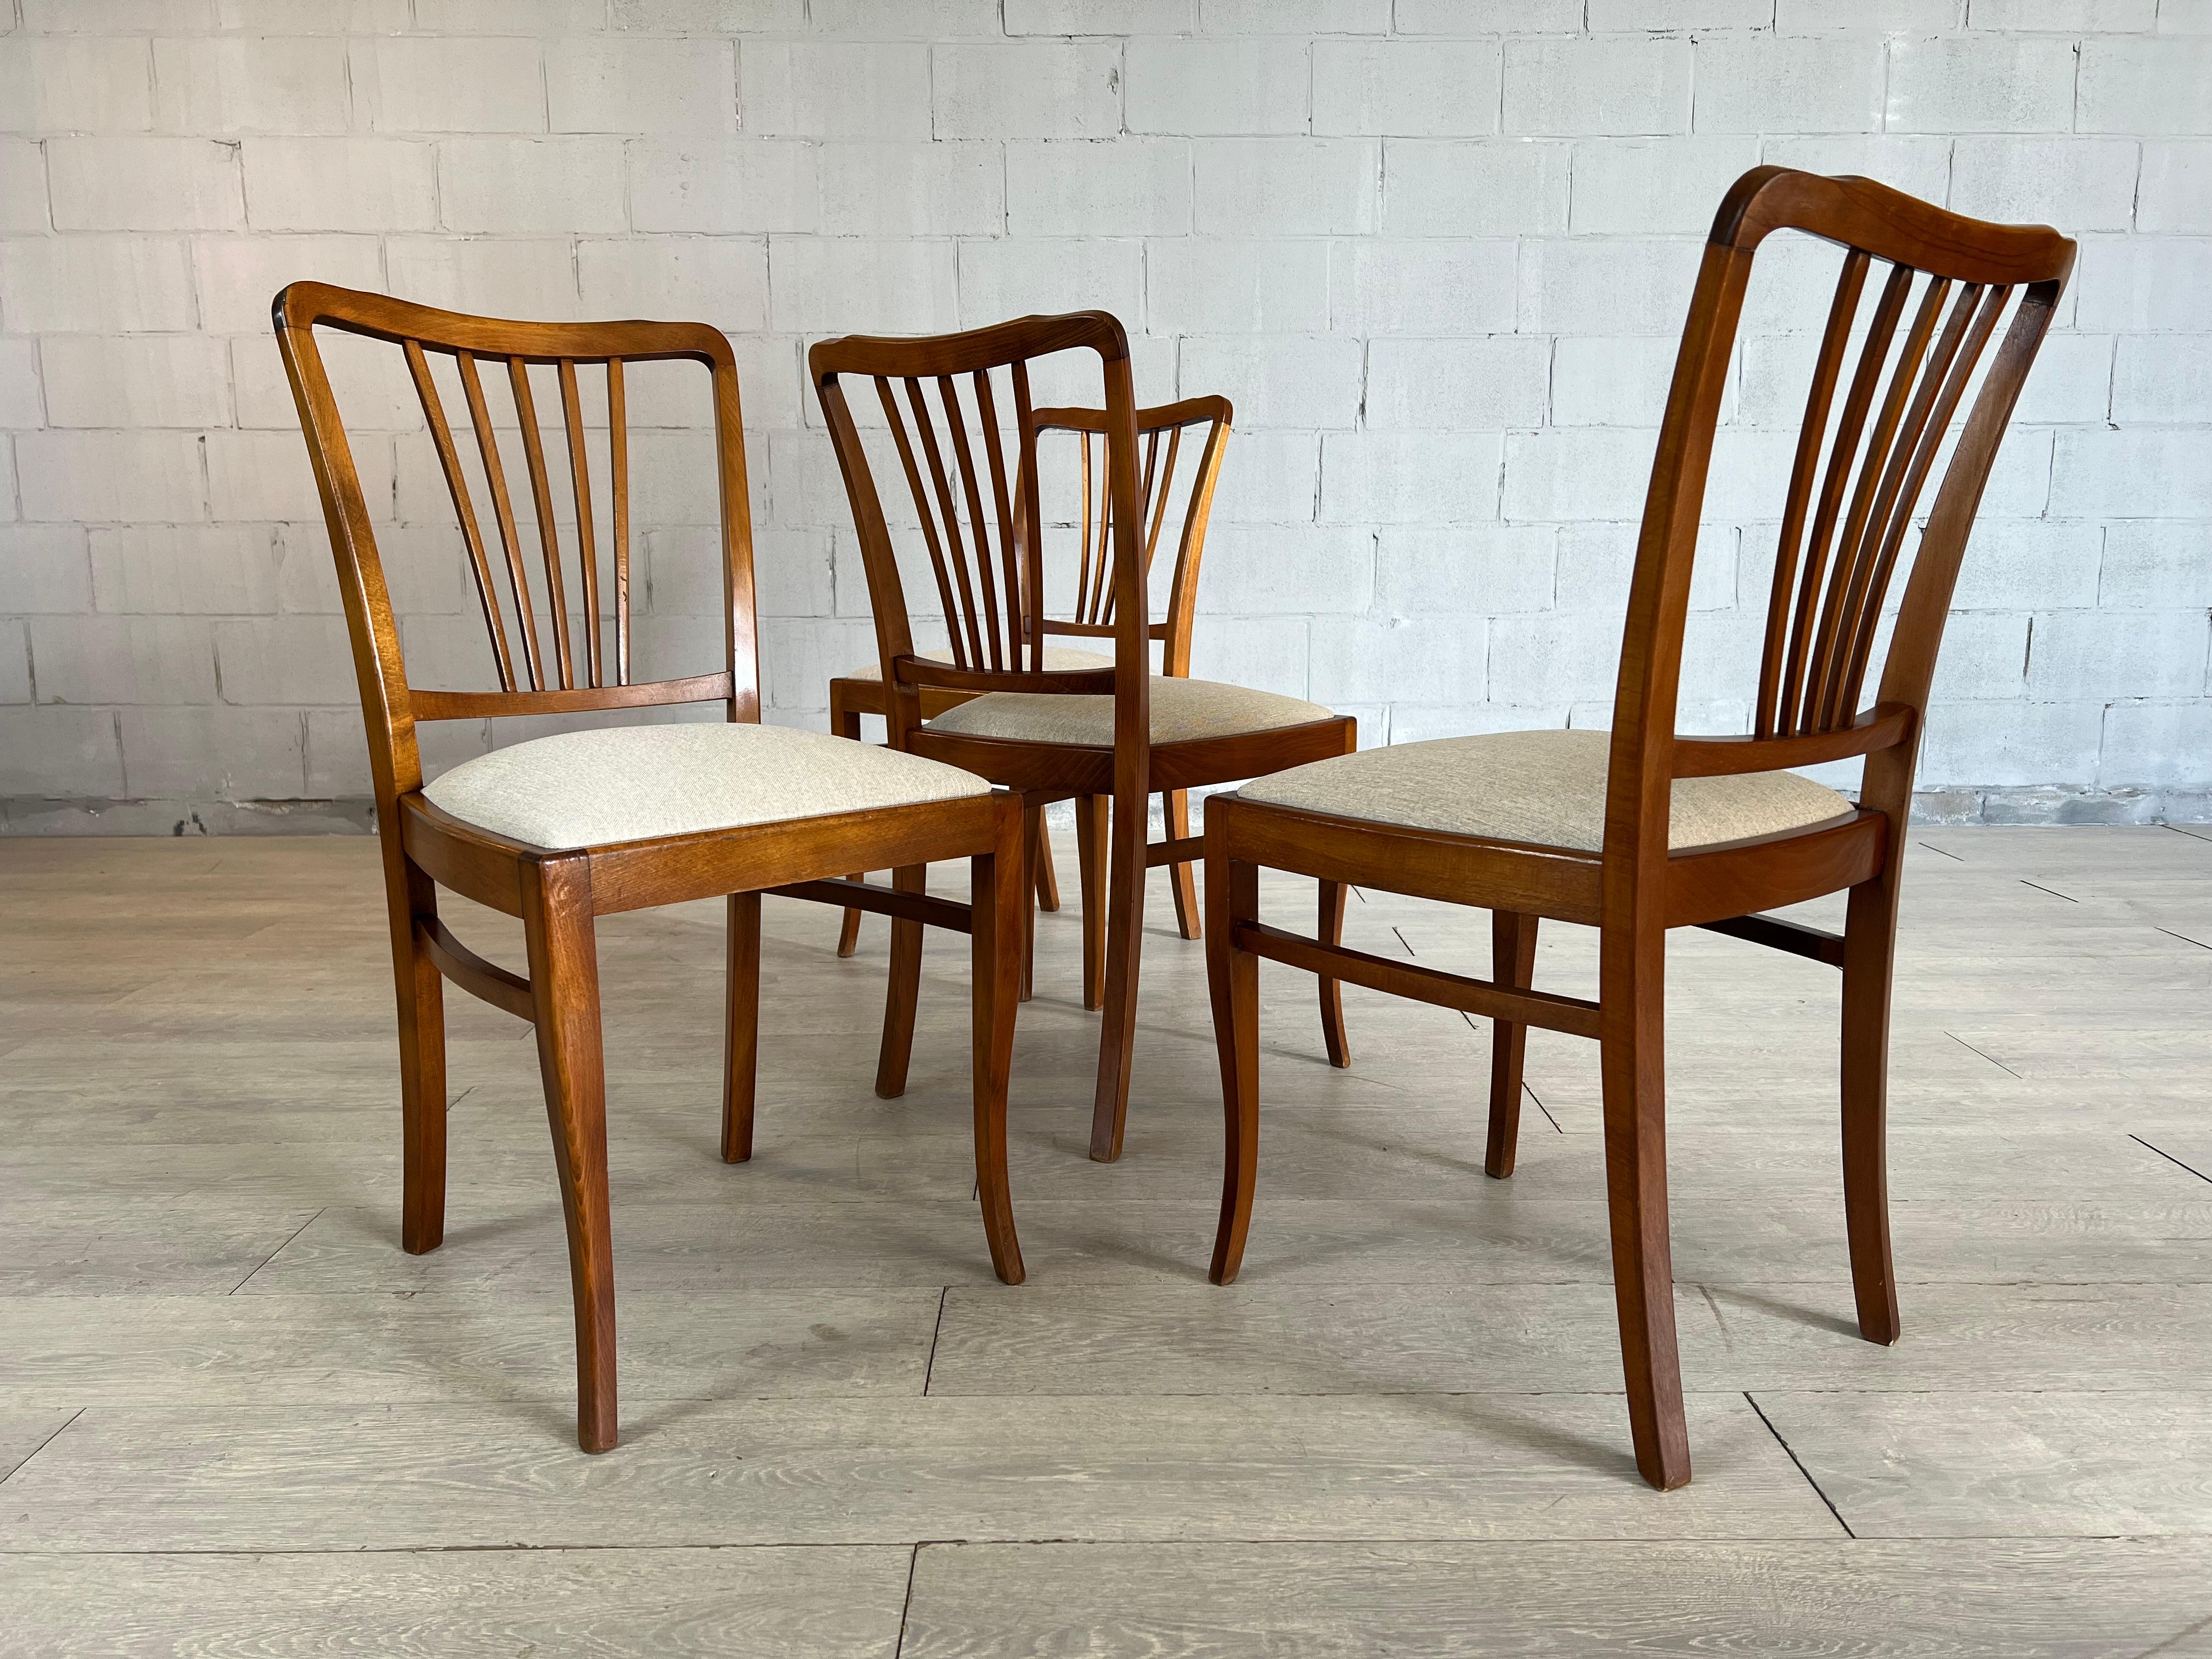 20th Century French Country Splat Back Dining Chairs, Reupholstered - Set of 4 For Sale